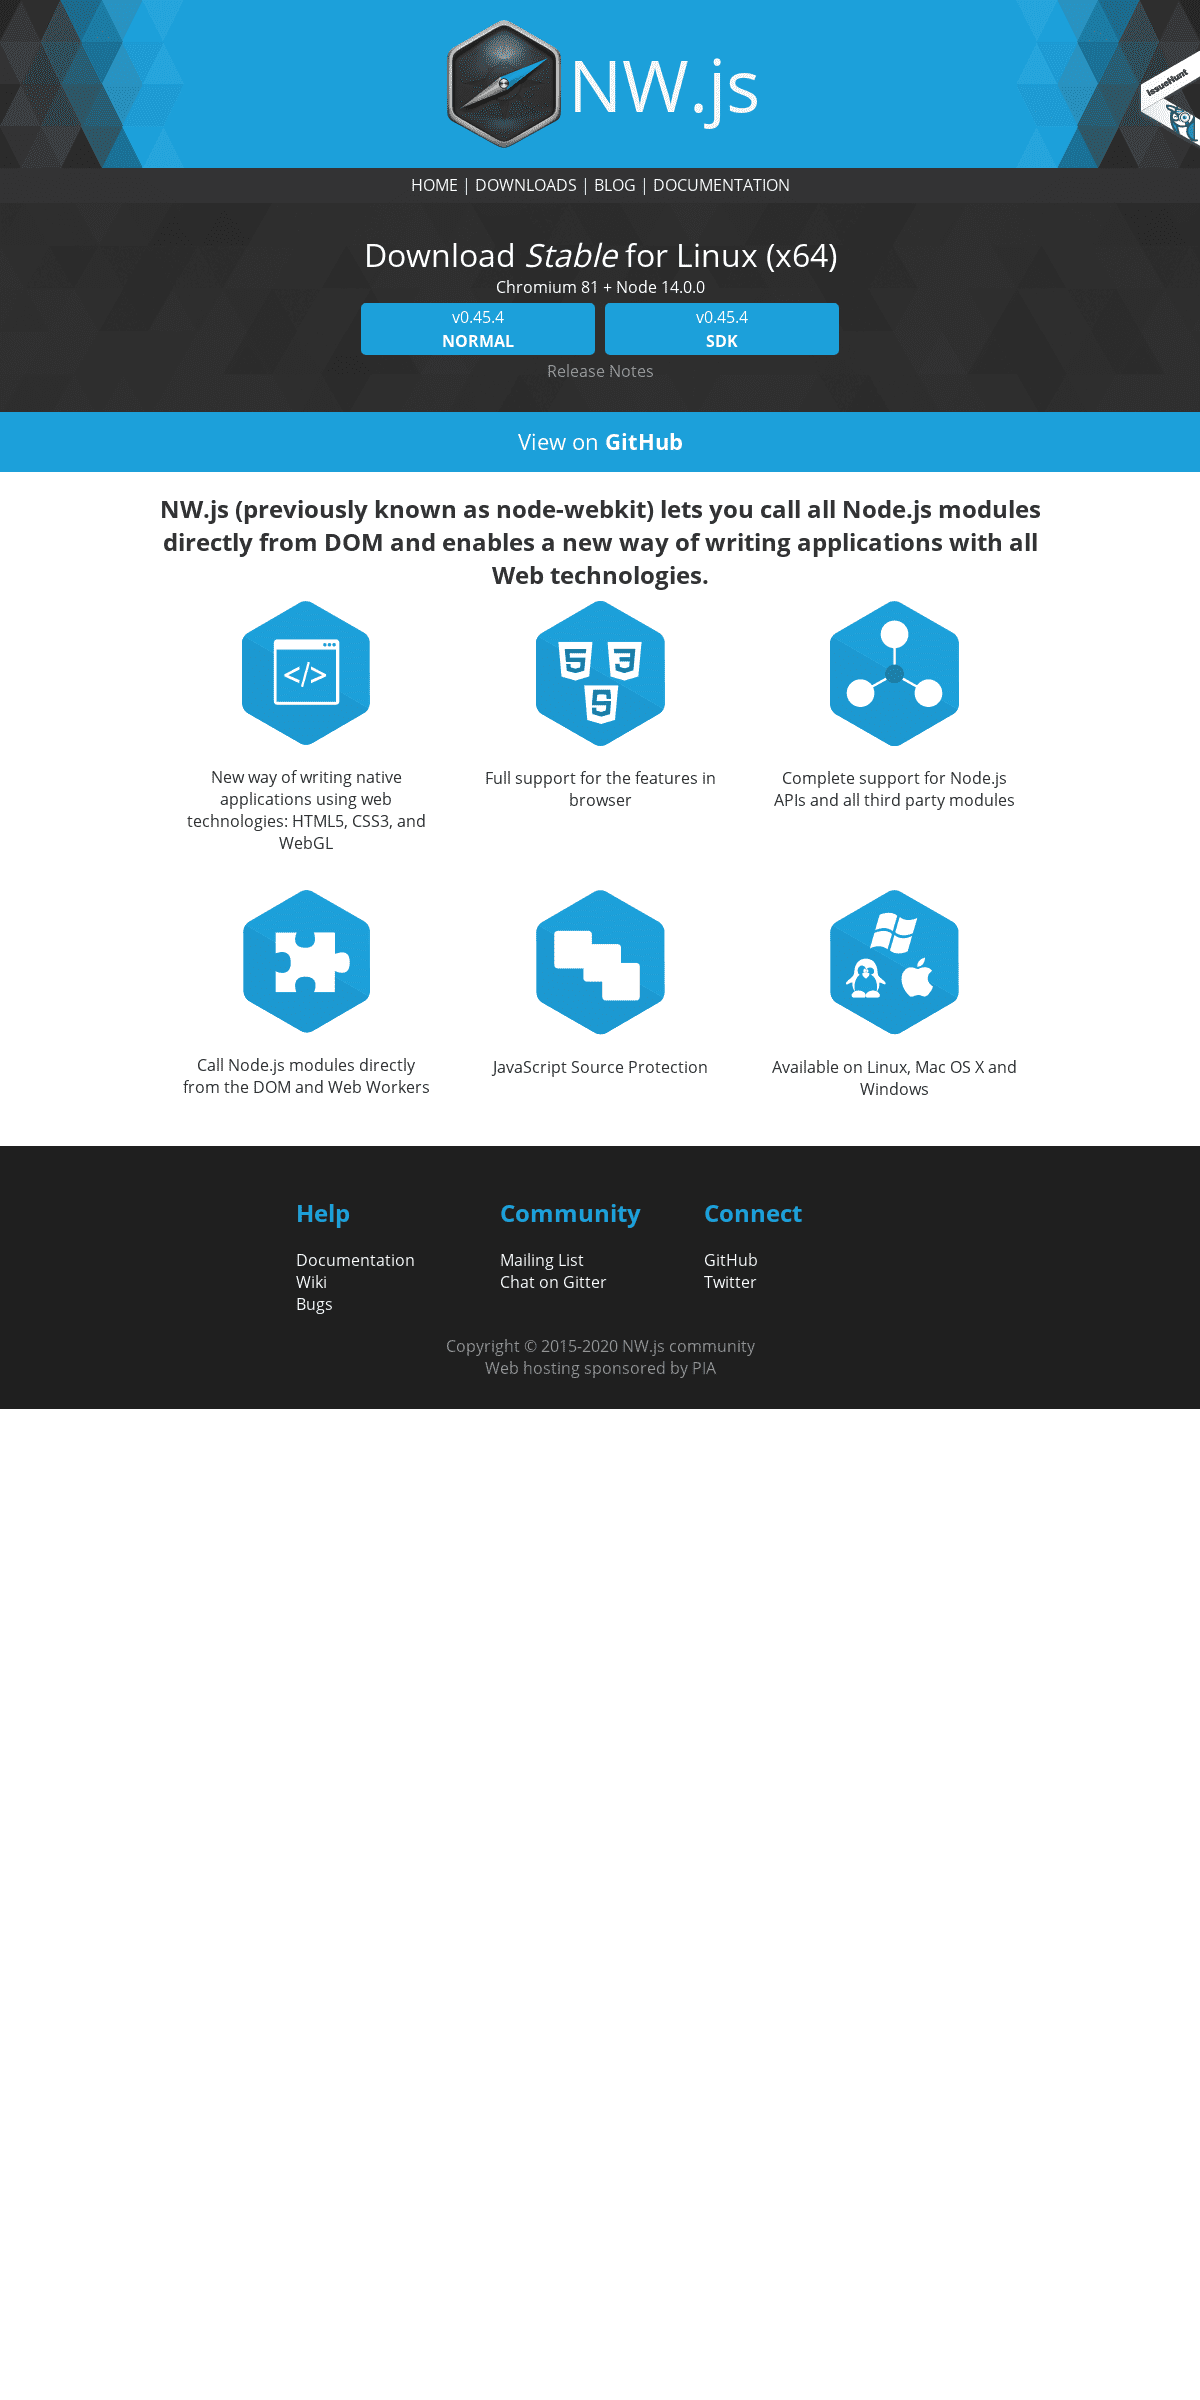 A complete backup of nwjs.io